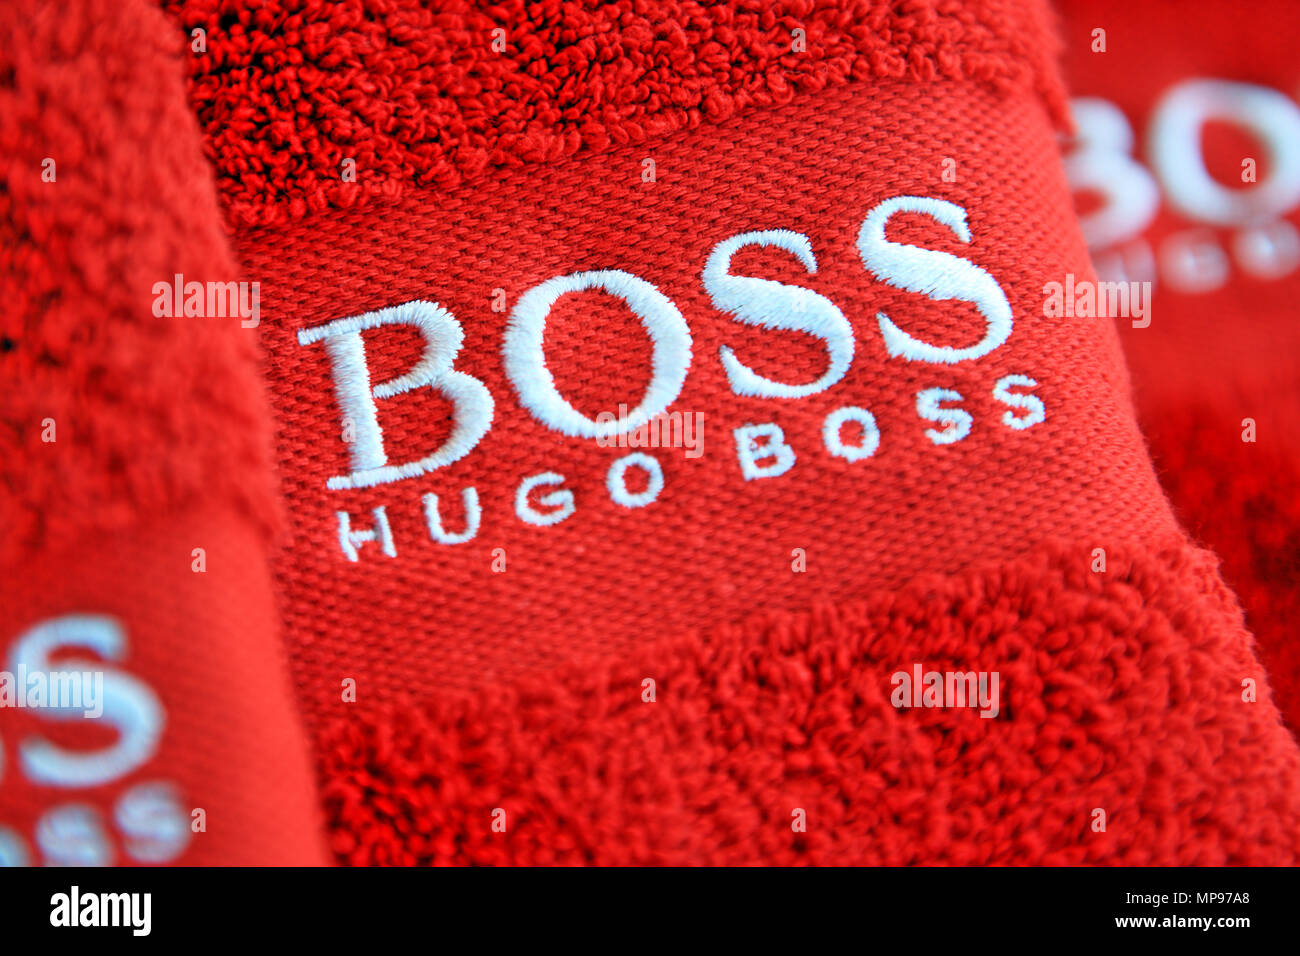 Hugo boss logo hi-res stock photography and images - Alamy